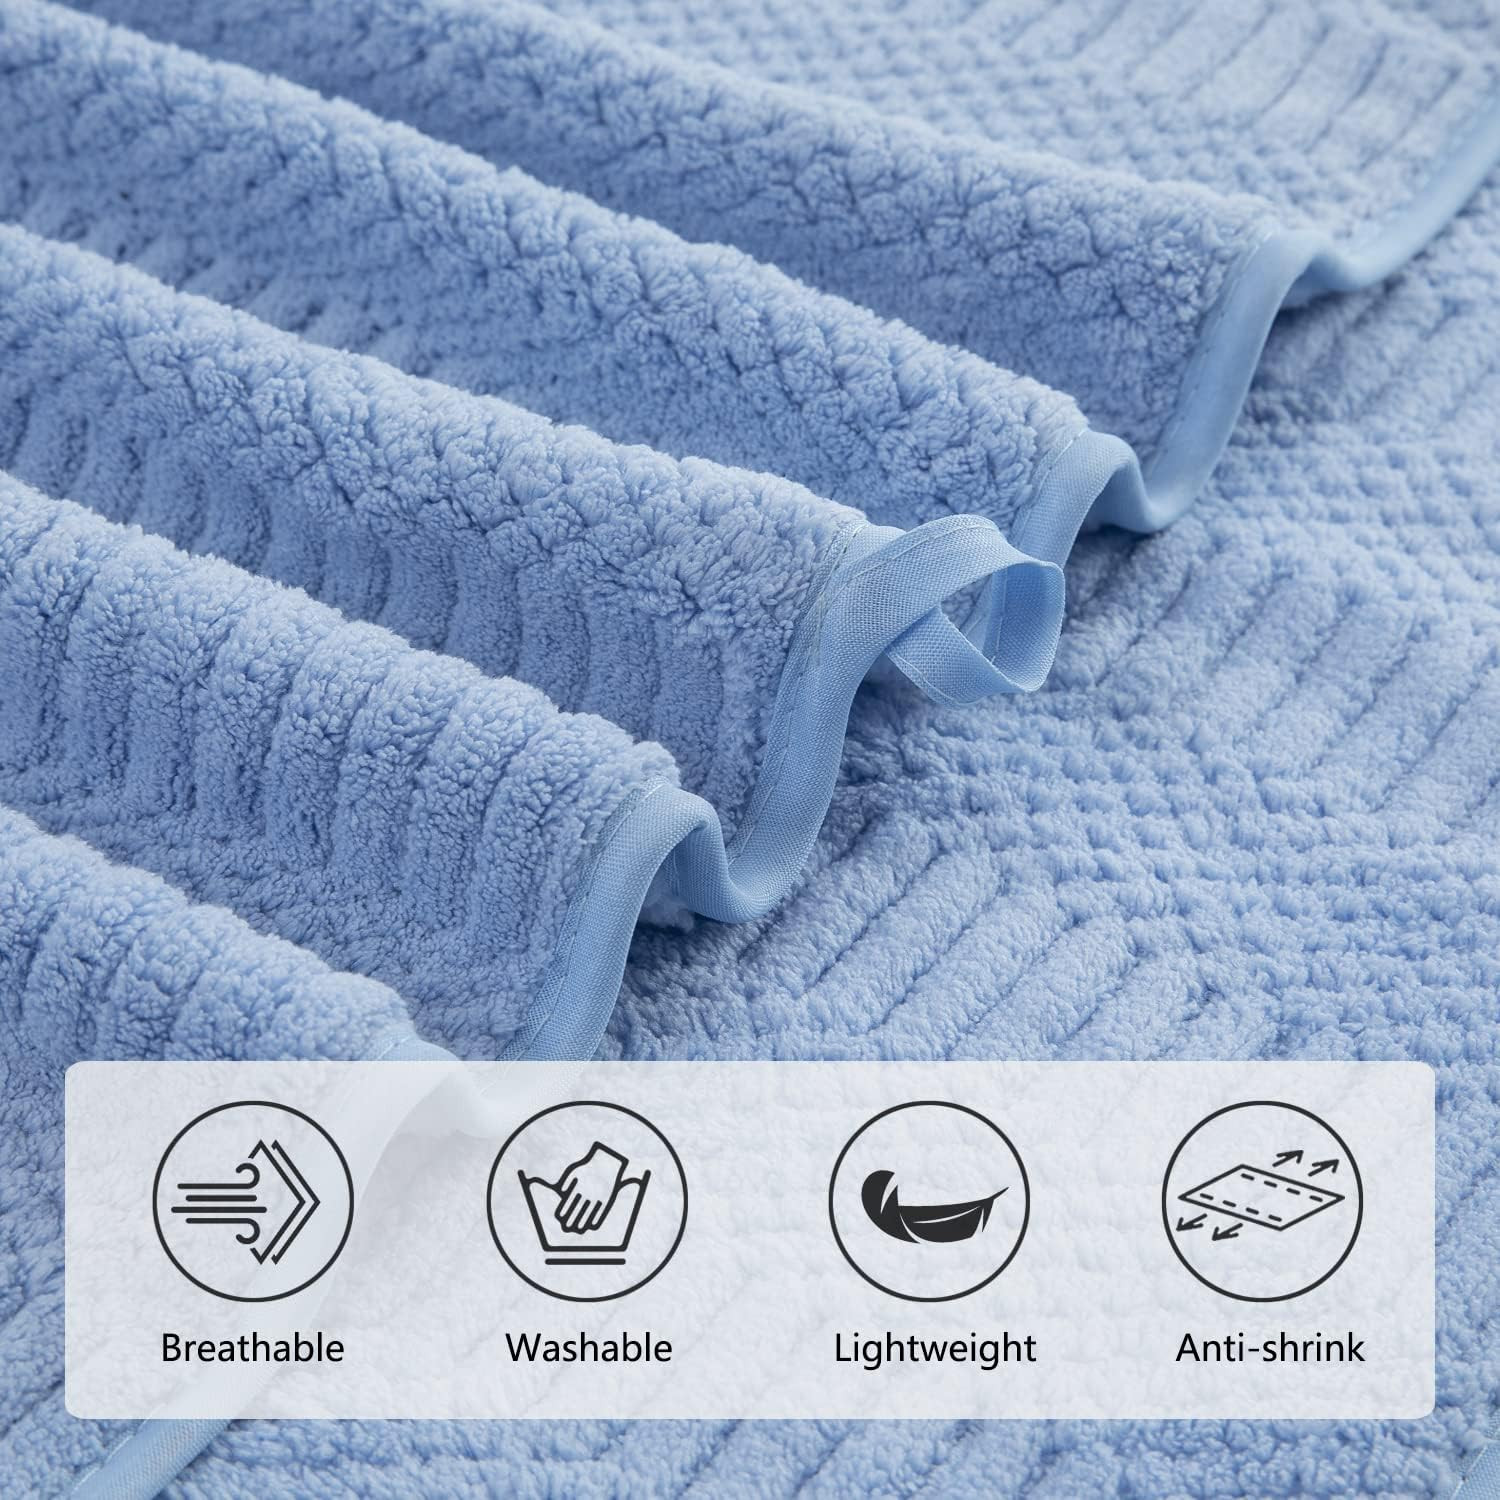 Kuber Industries Bath Towel For Men, Women|280 GSM|Extra Soft & Fade Resistant|Polyester Towels For Bath|Waffle Texture|Bathing Towel, Bath Sheet (Blue)